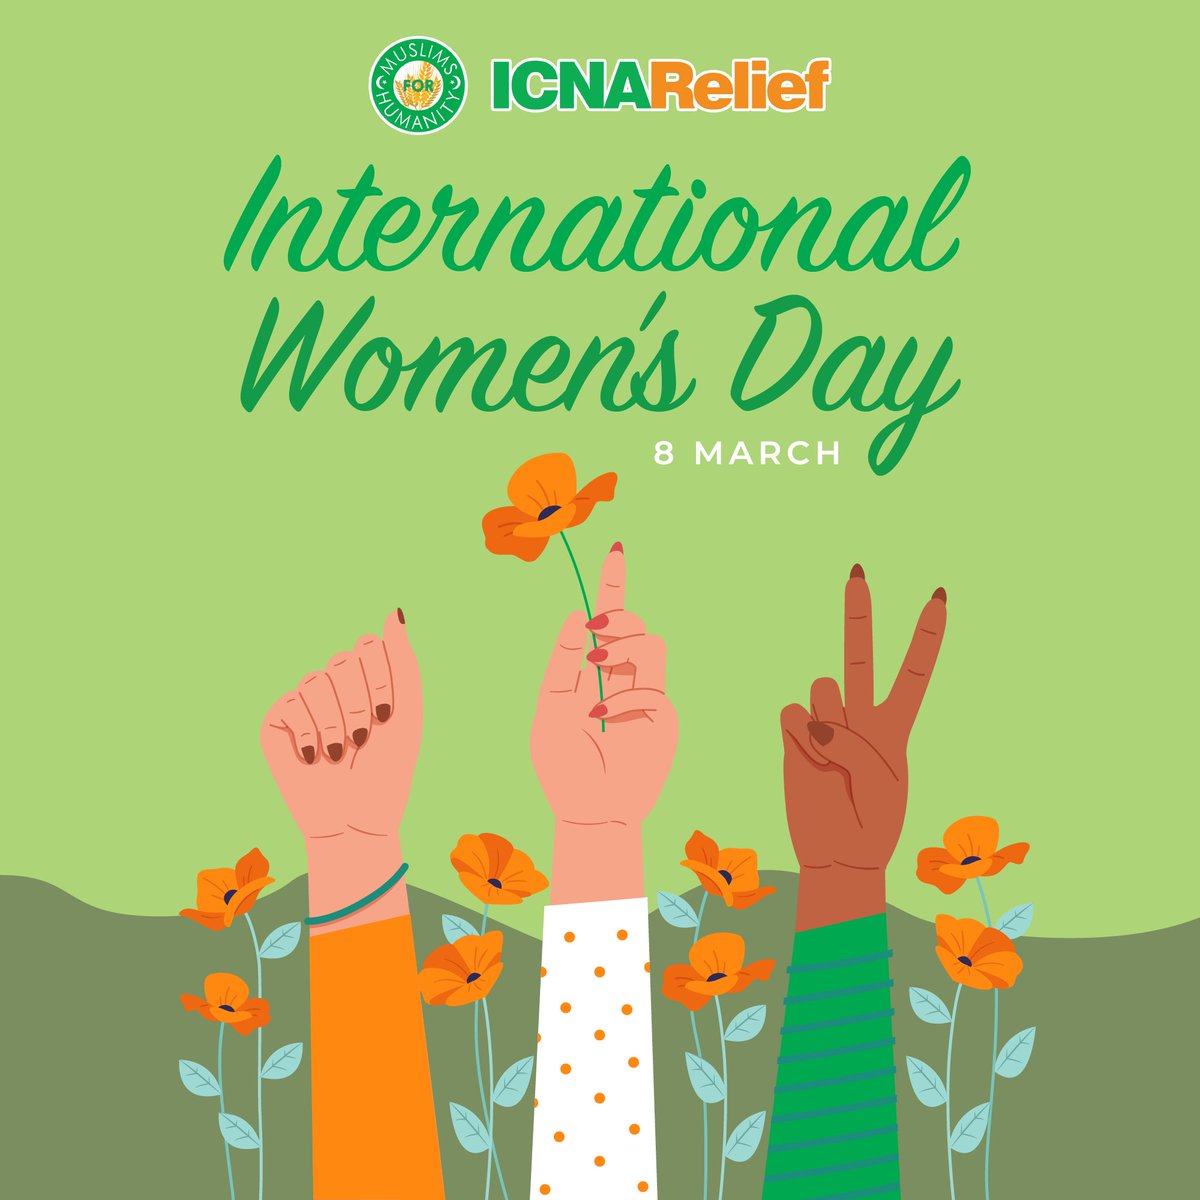 March 8th is International Women's Day. “No matter where you are in life, inspire and empower the women around you. Success is never reached alone and wisdom and wealth are sweeter shared.” We at ICNA Relief continue to empower resilient women through support, advocacy and…